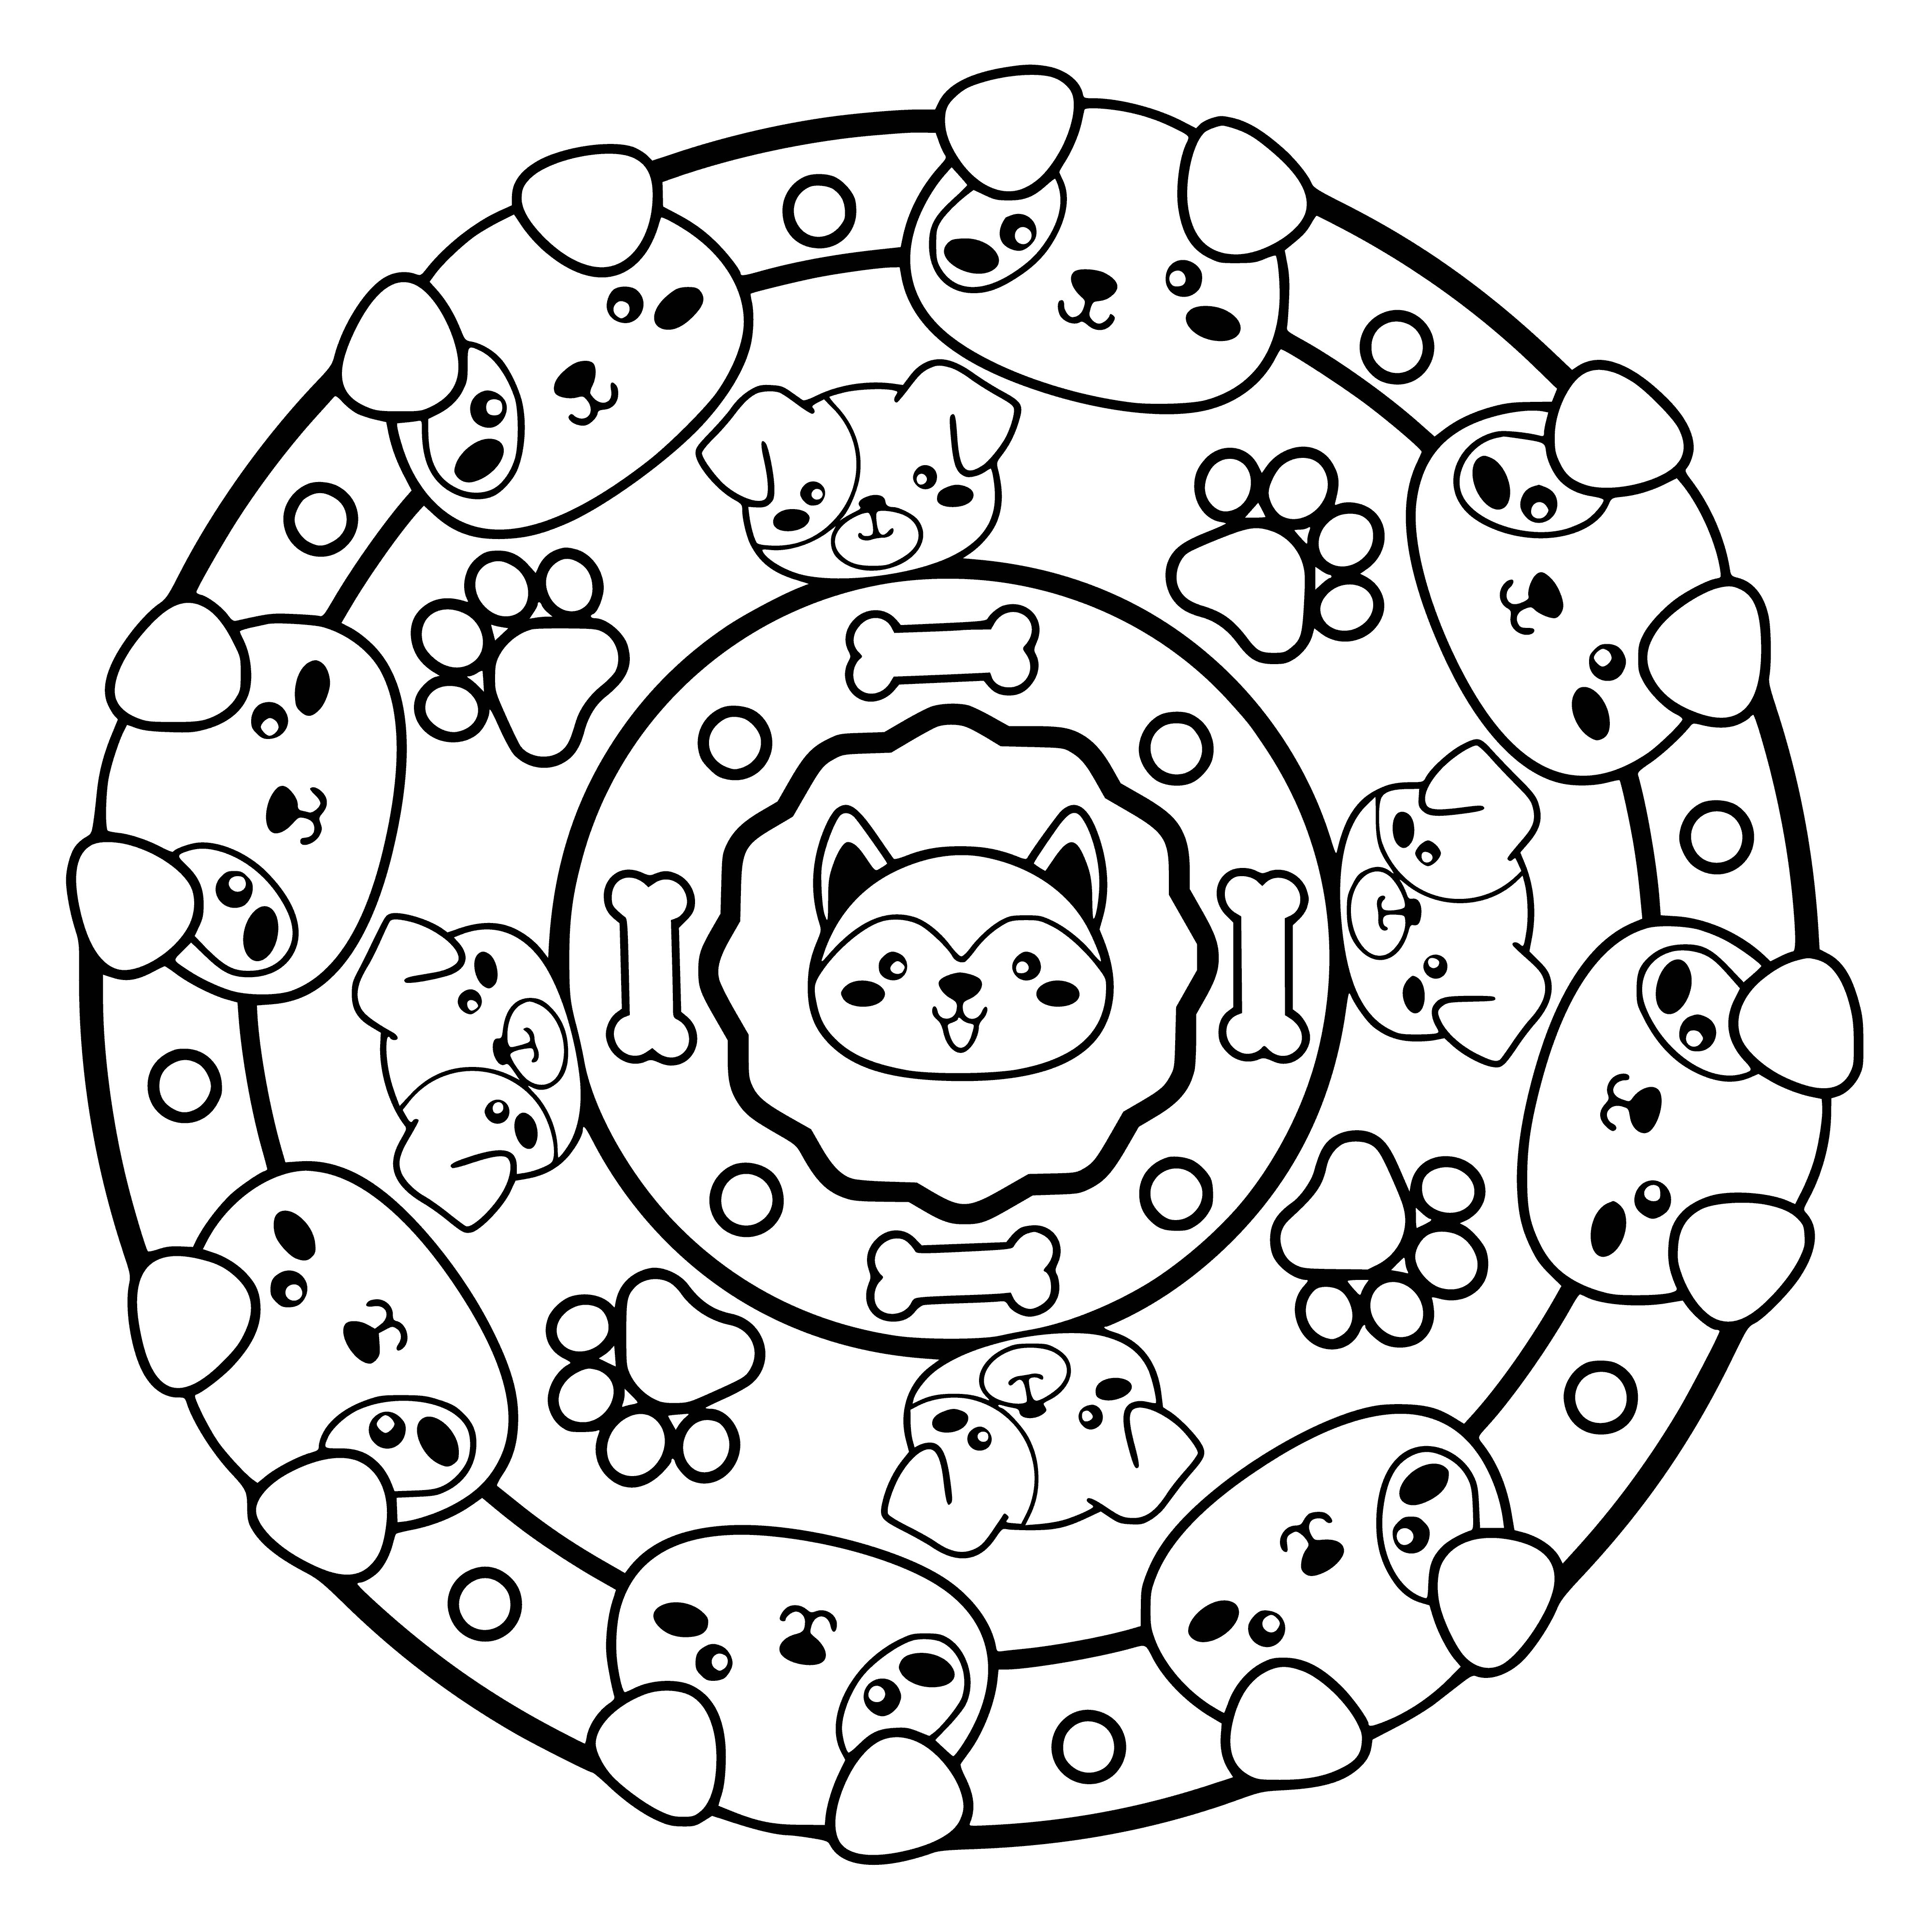 coloring page: A black & white mandala w/ animals in center (mouse) & around it: bird, cat, dog, rabbit, deer.